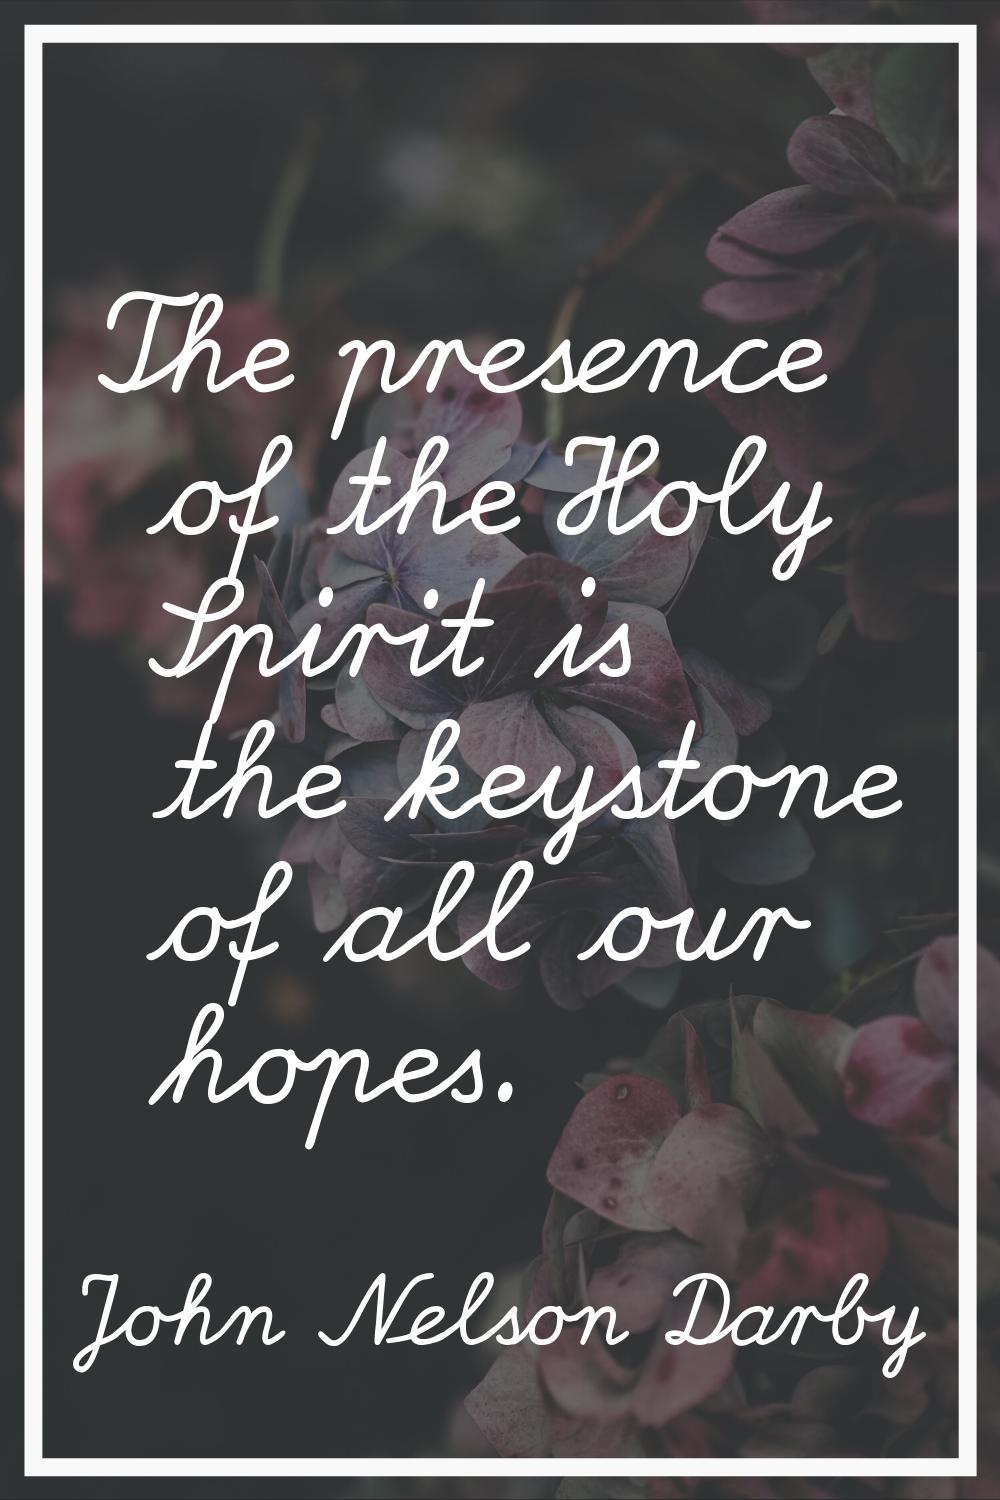 The presence of the Holy Spirit is the keystone of all our hopes.